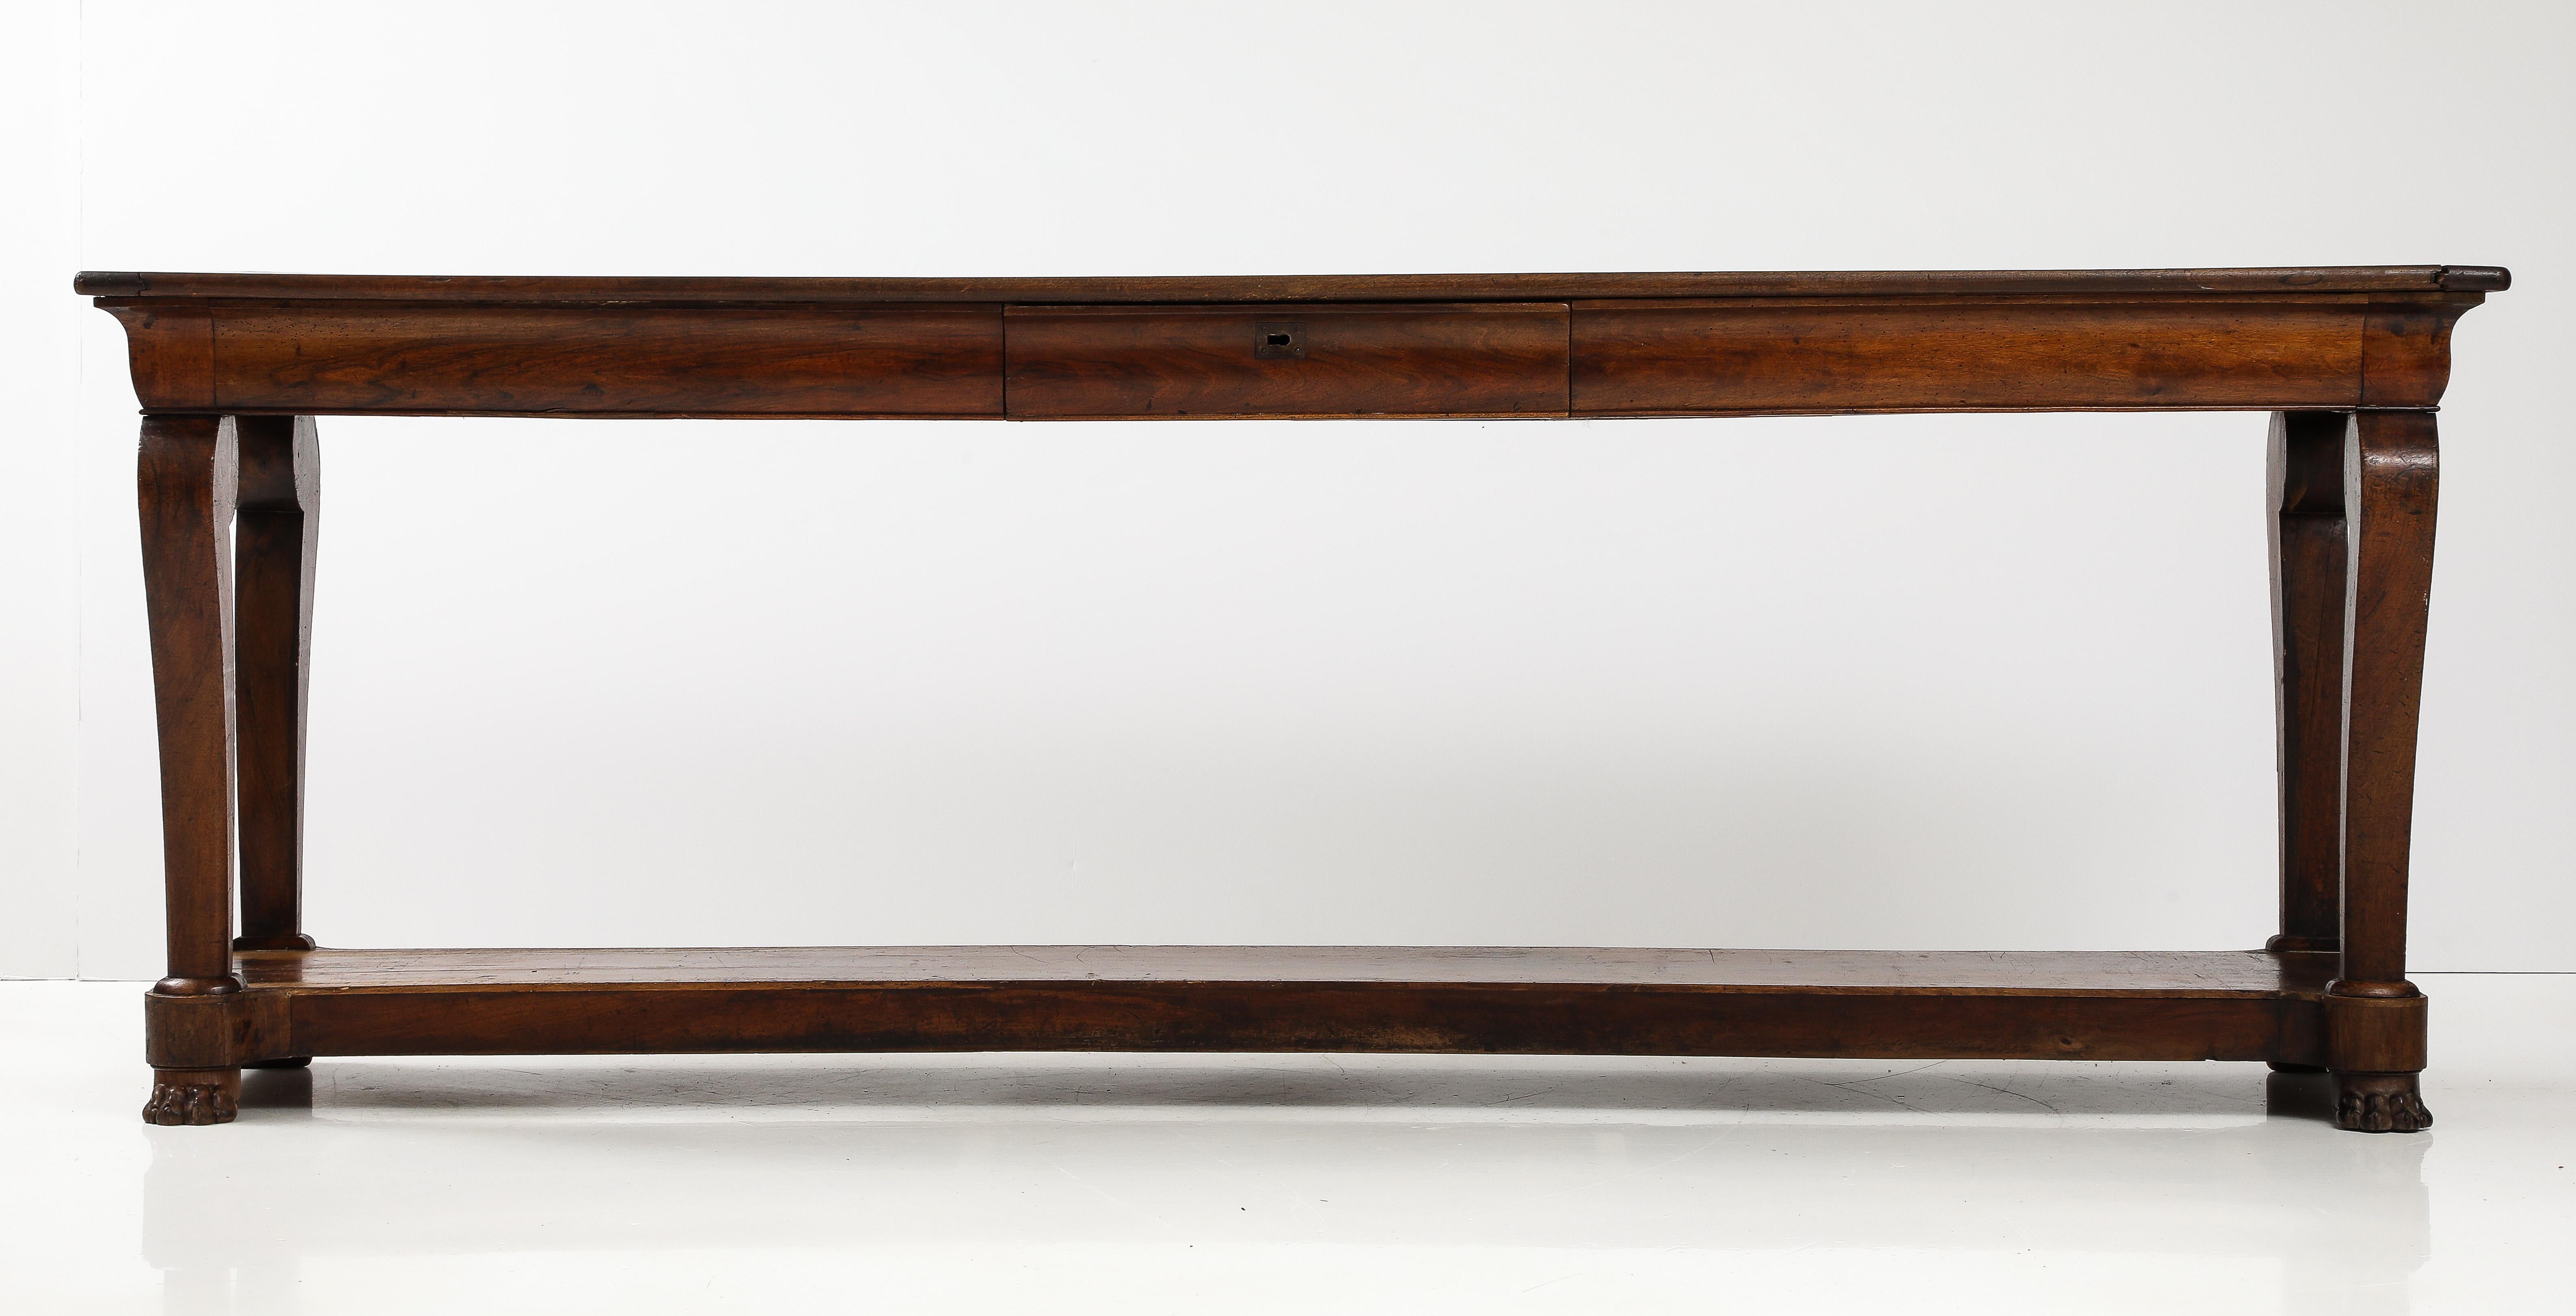 19th C. French Walnut Console with Drawer (no key, but it is open)
Walnut
H: 33.25 D: 25.5 L: 92.25 in.